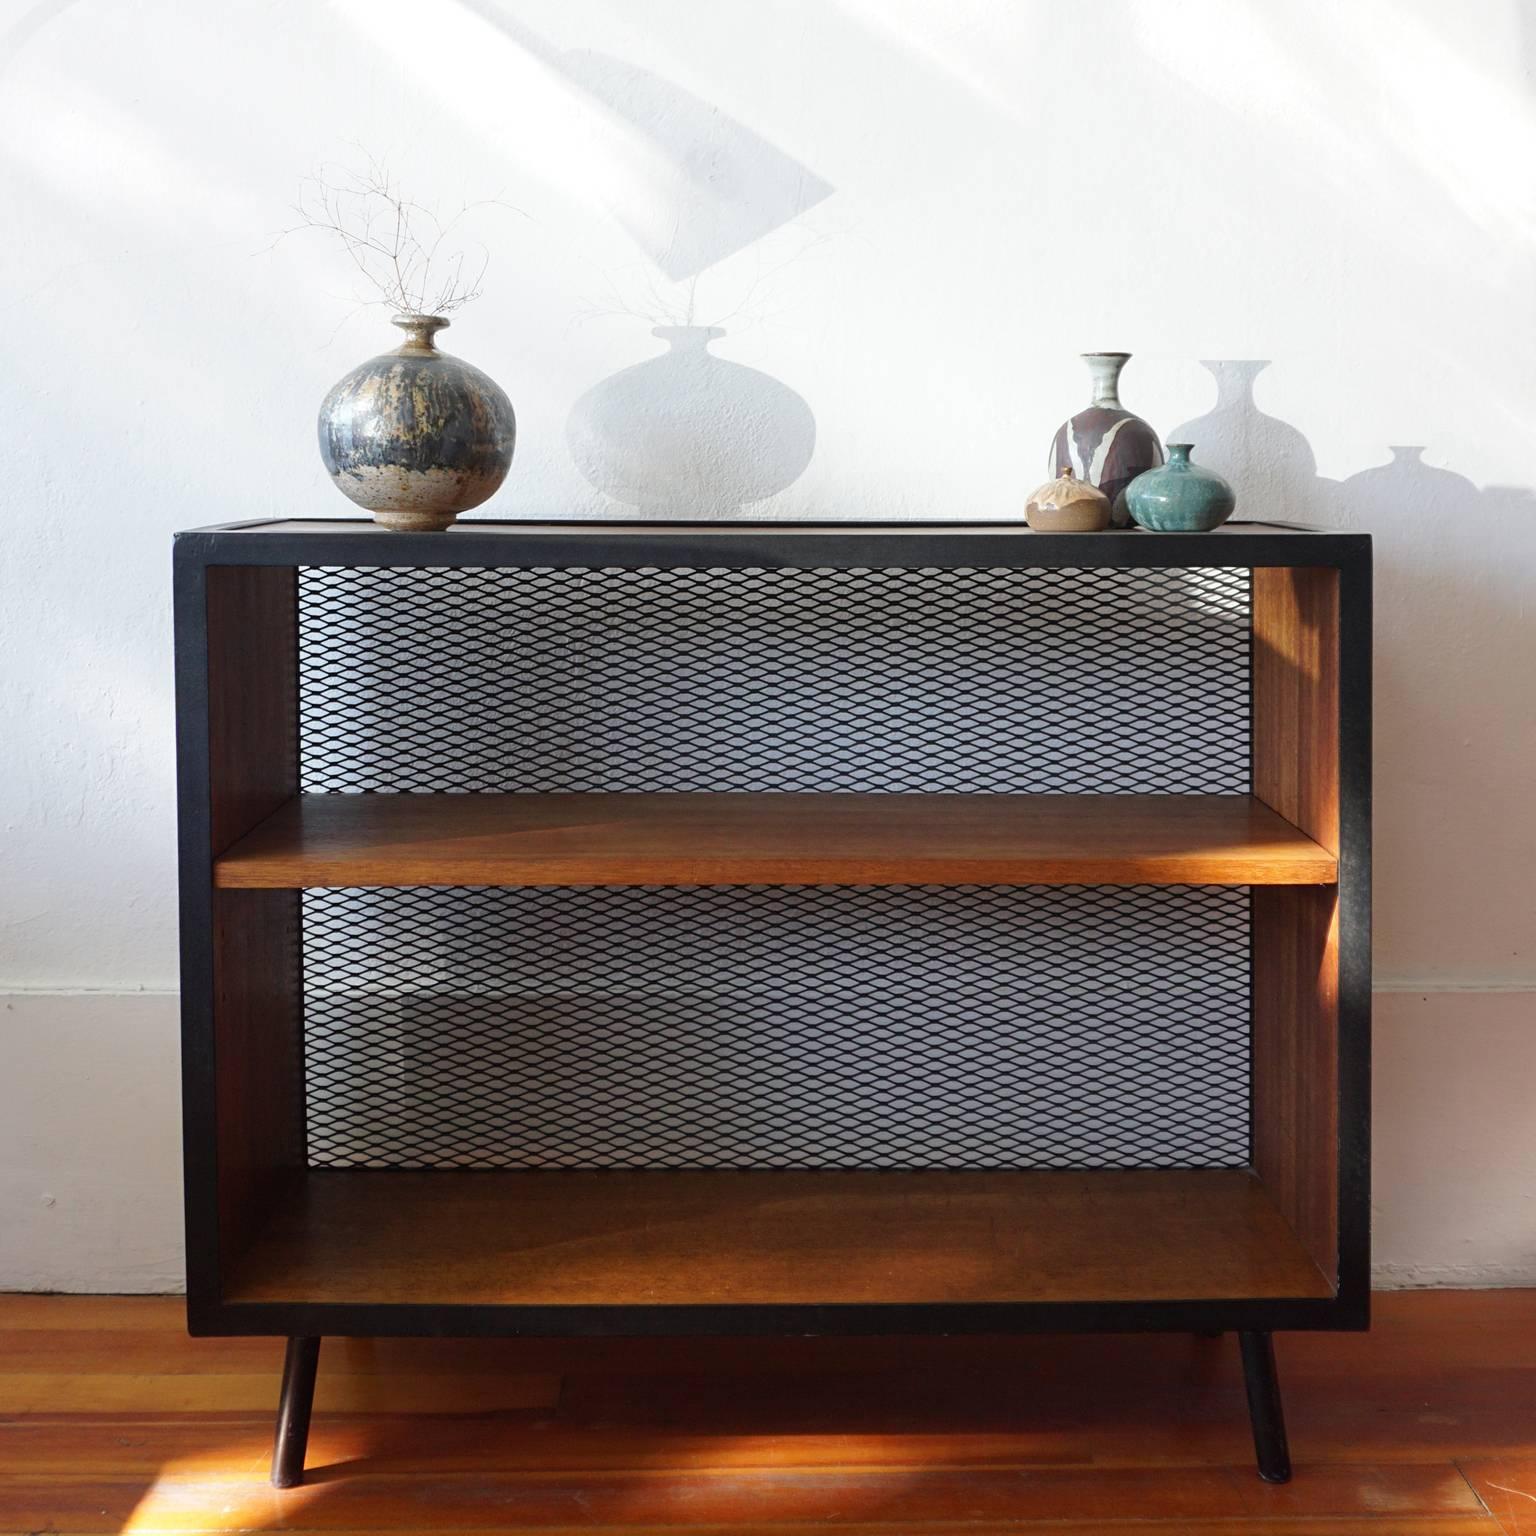 Philippine mahogany and steel bookcase by Los Angeles based Vista Furniture Company. Expanded metal backing with a solid steel frame. There are three positions to adjust shelves. Produced in the early 1950s.

Extremely sturdy construction.